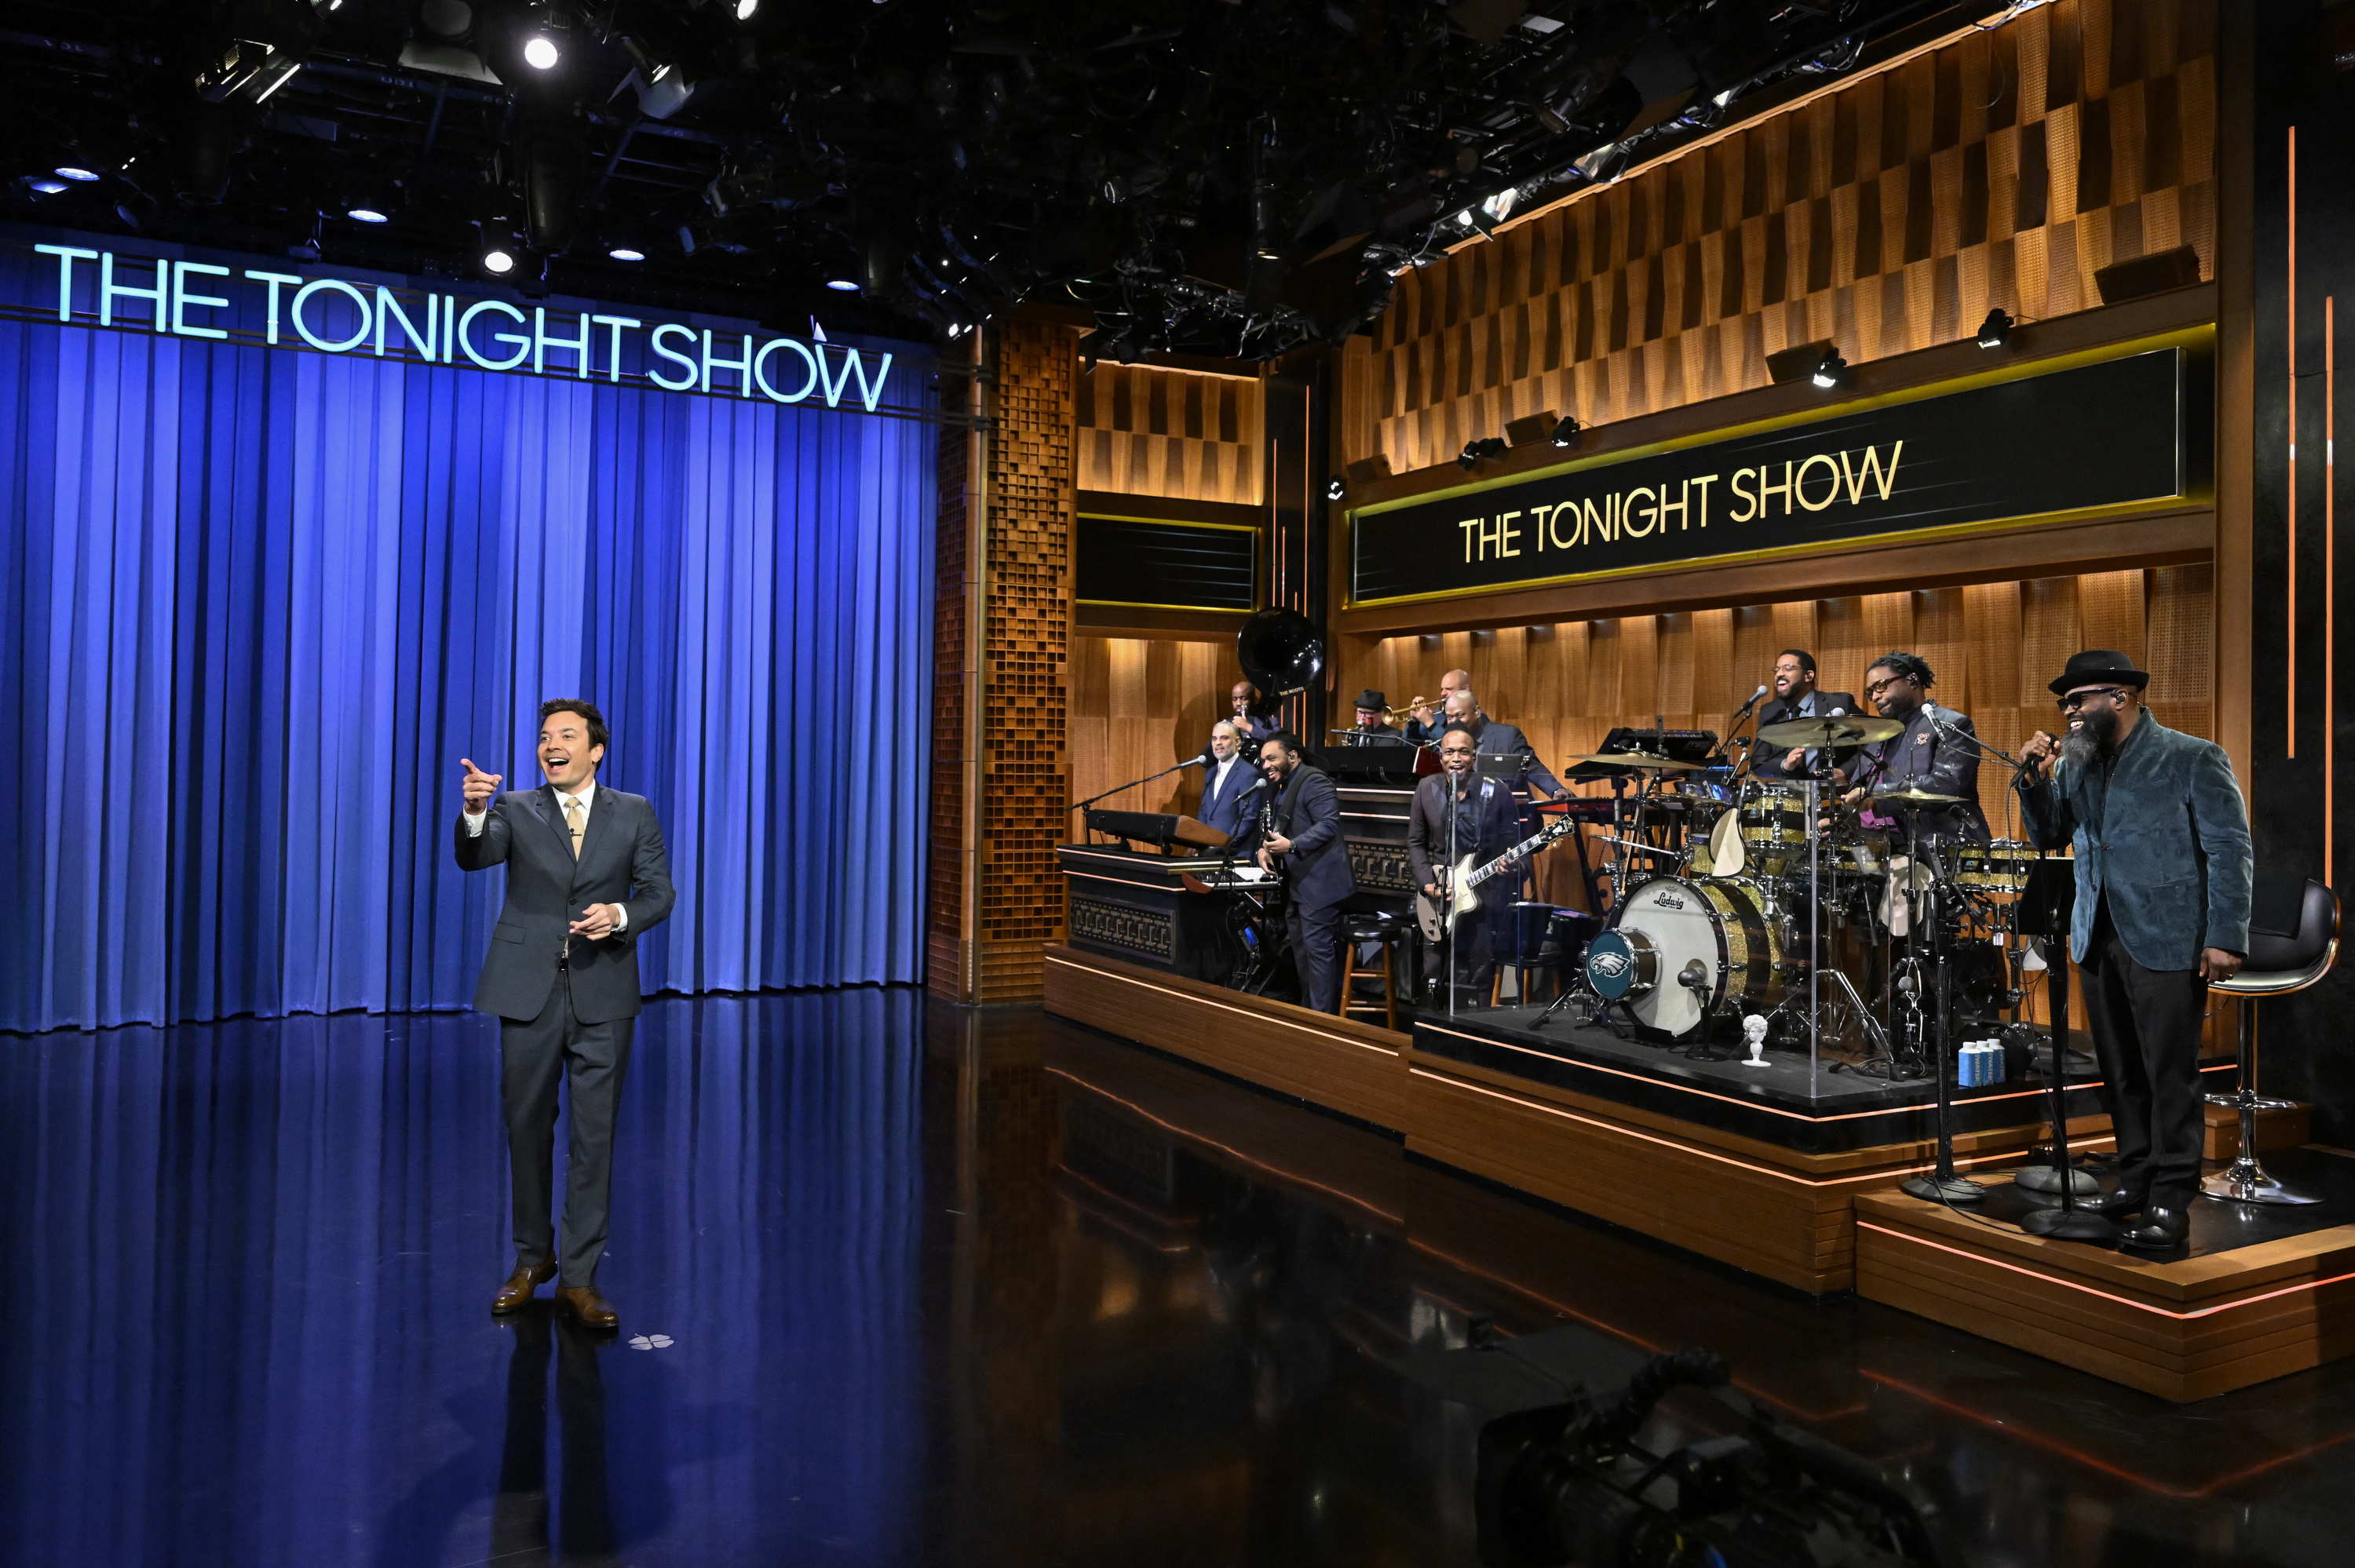 Jimmy Fallon stands next to The Tonight Show house band, the Roots